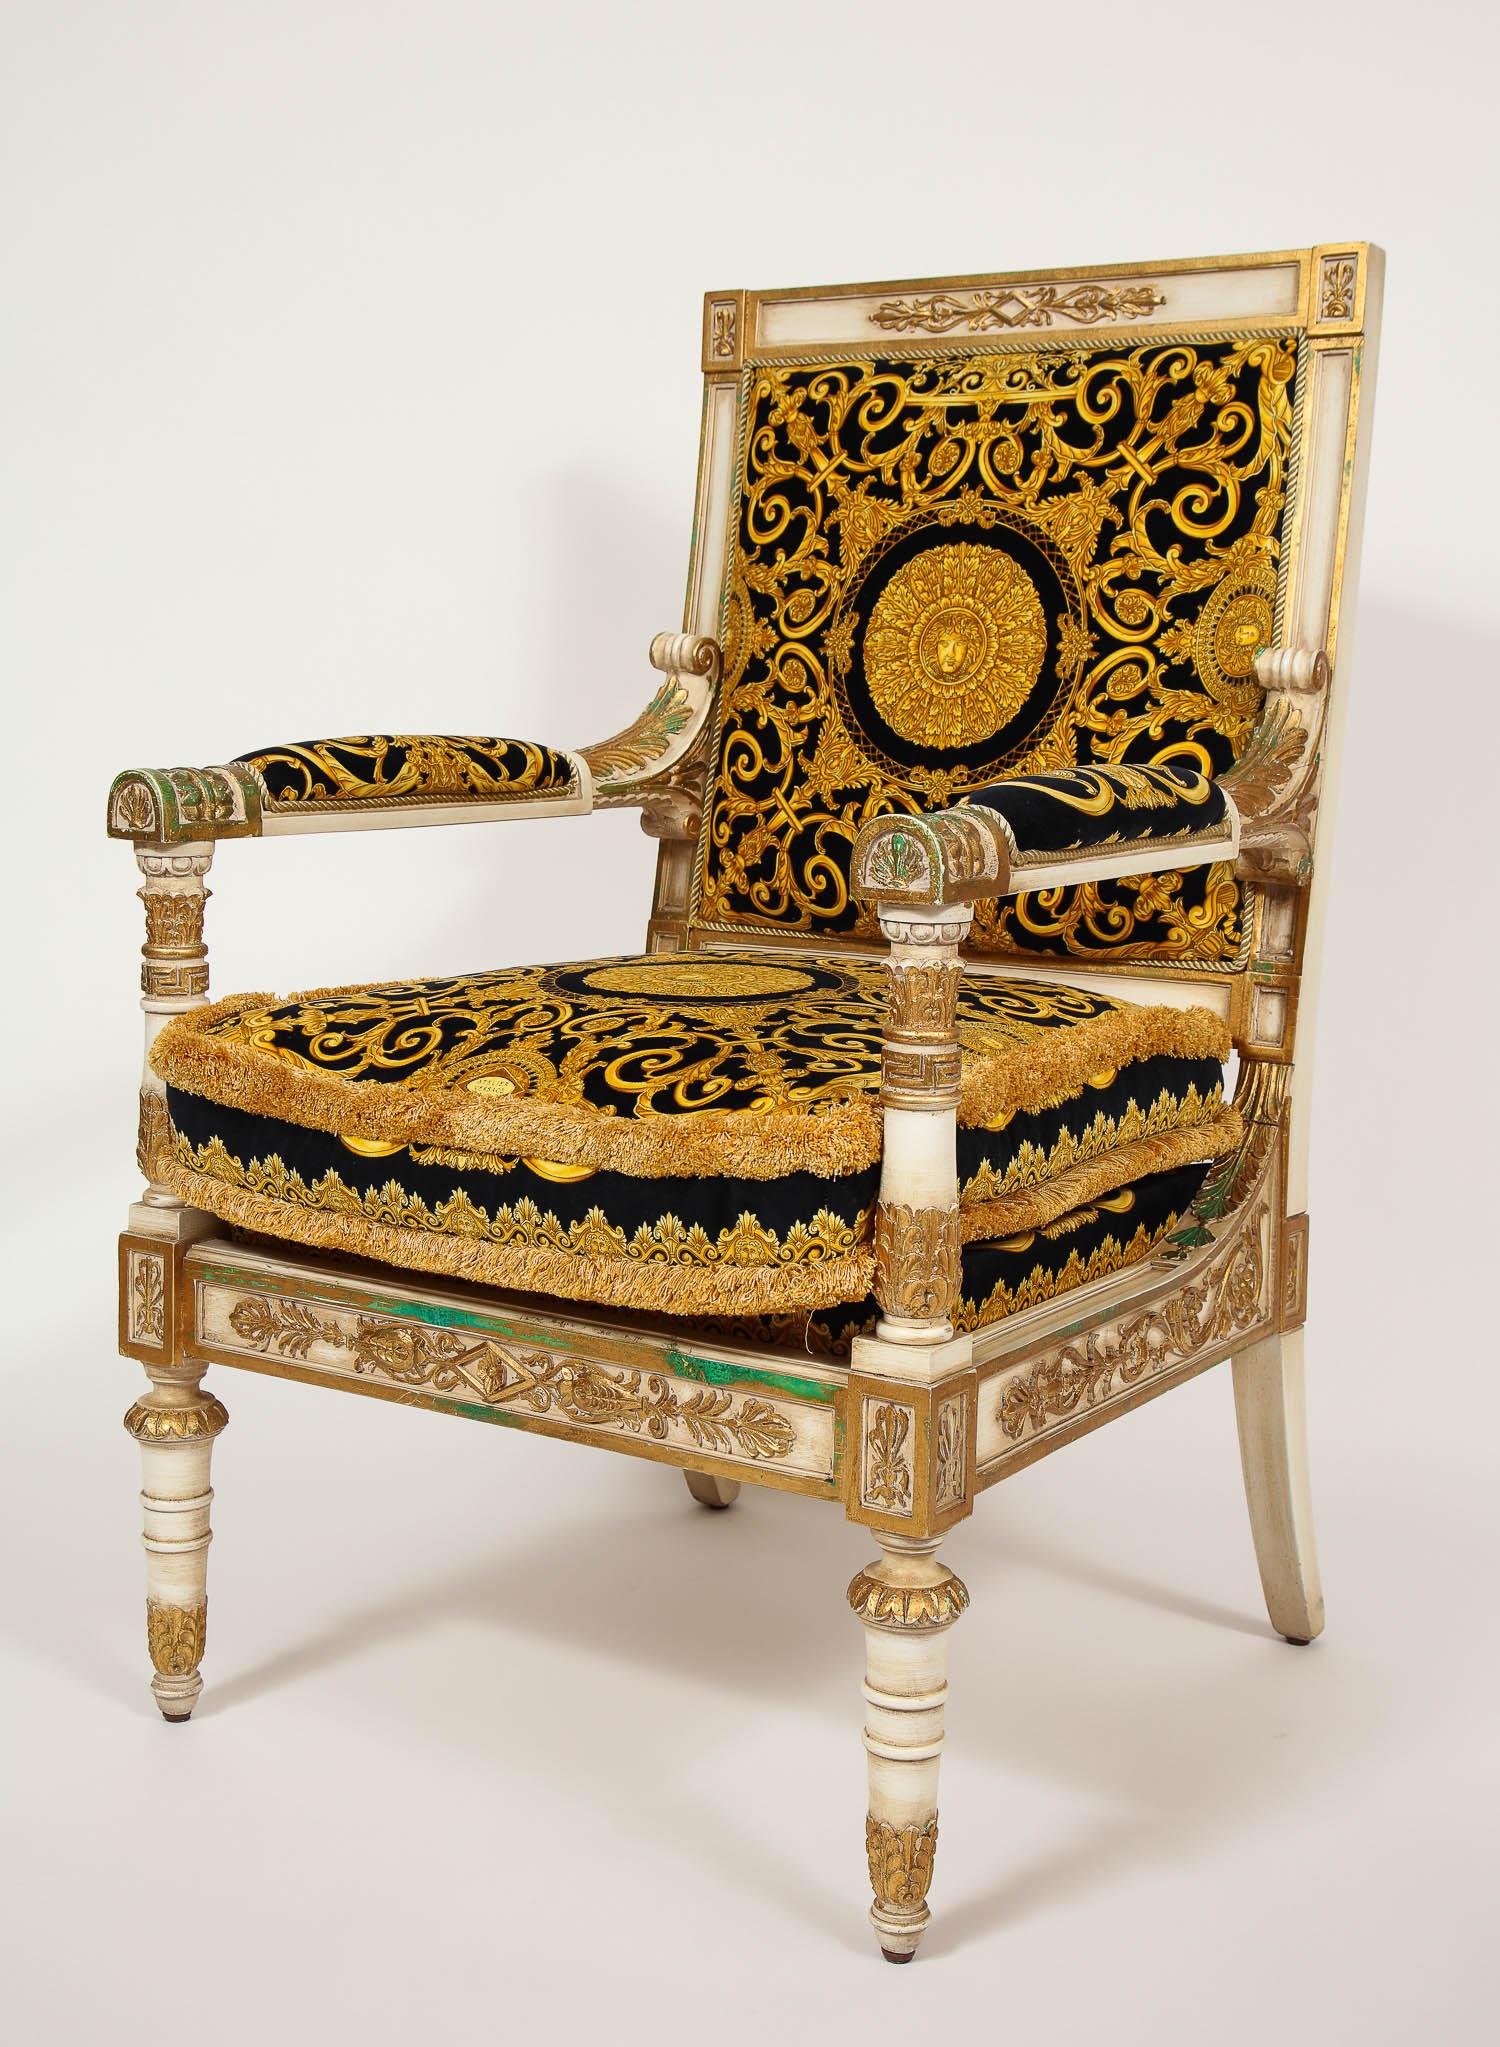 An exceptionally large pair of Empire style Versace armchairs. This magnificent one-of-a-kind Empire Style Versace fauteuils have exceptional craftsmanship; wonderfully hand-carved and detailed giltwood frames, custom upholstered in Versace Empire